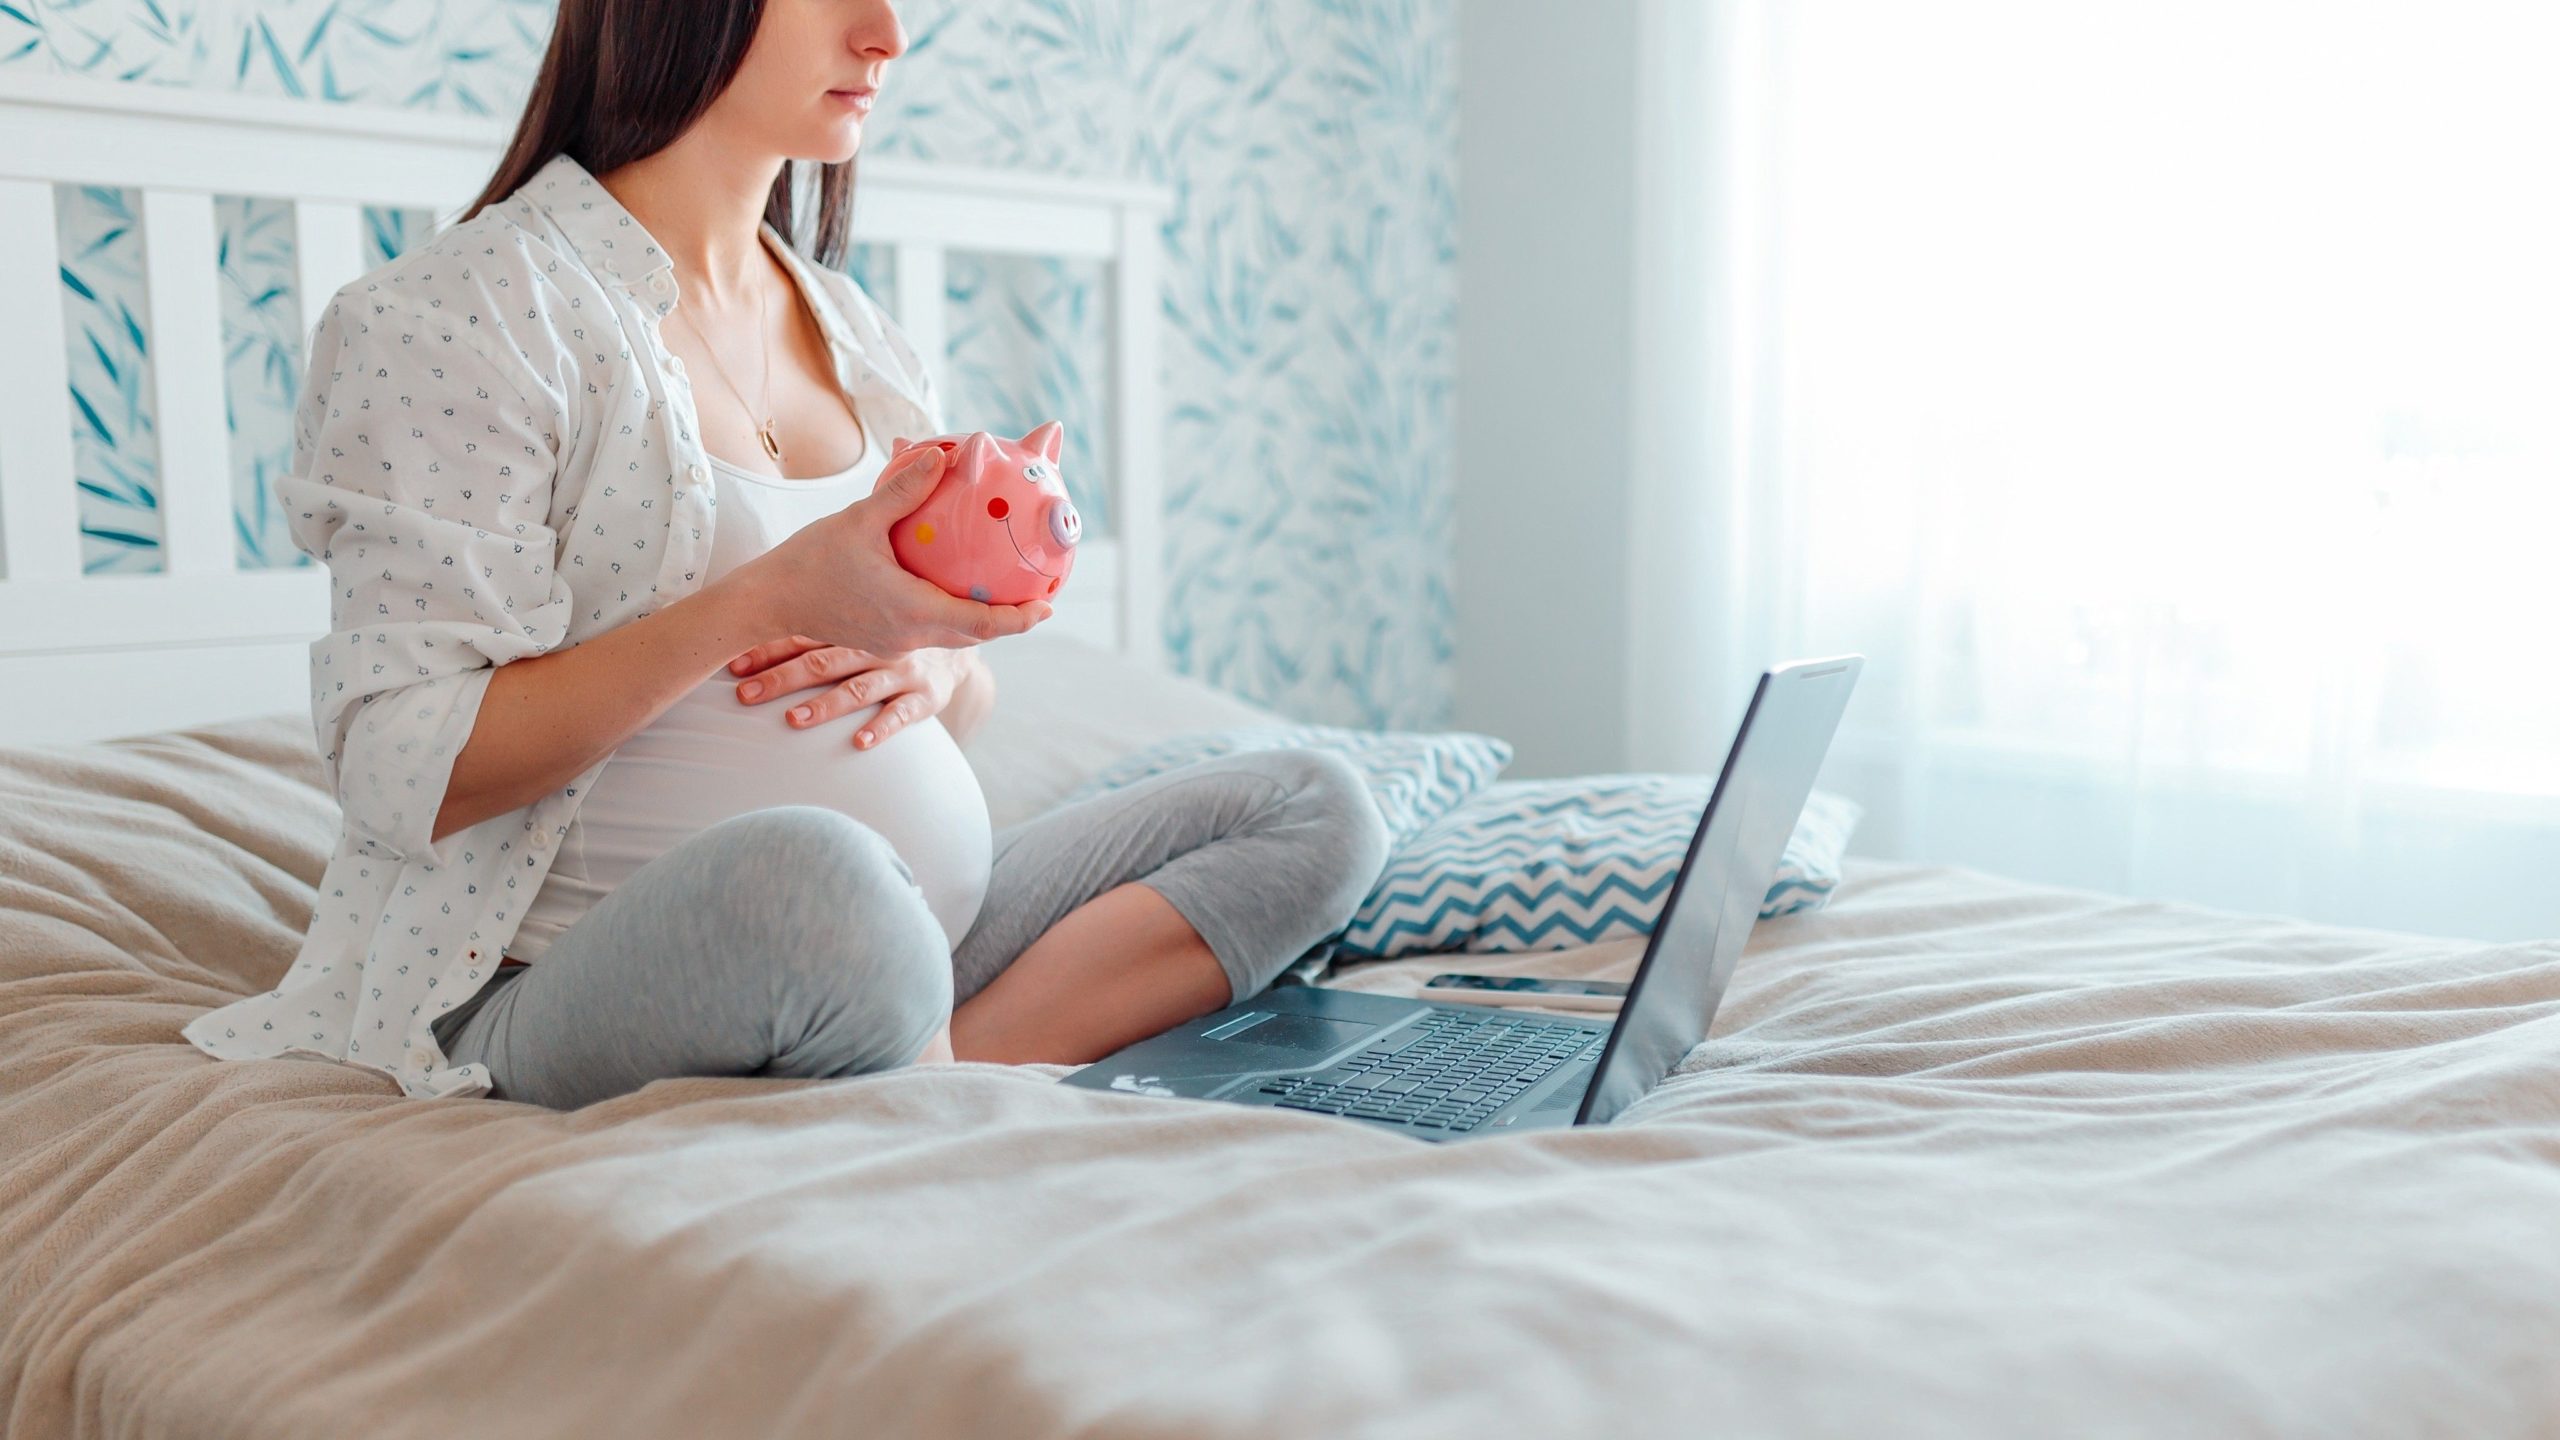 Pregnant woman sitting on bed with laptop, while holding a piggy bank and financially preparing for a baby